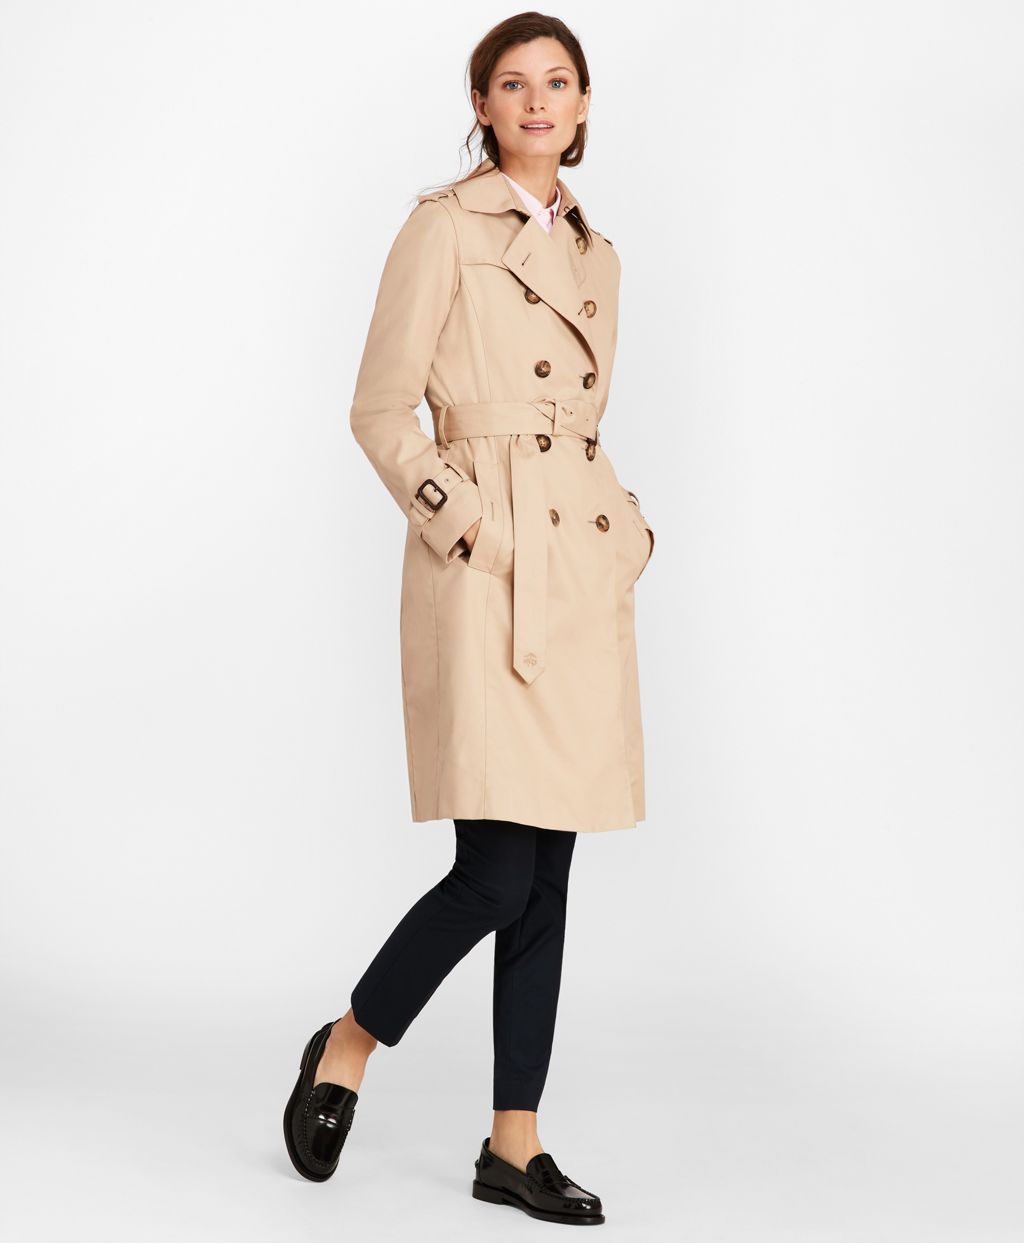 Brooks Brothers Women's Double-Breasted Trench Coat | Brooks Brothers